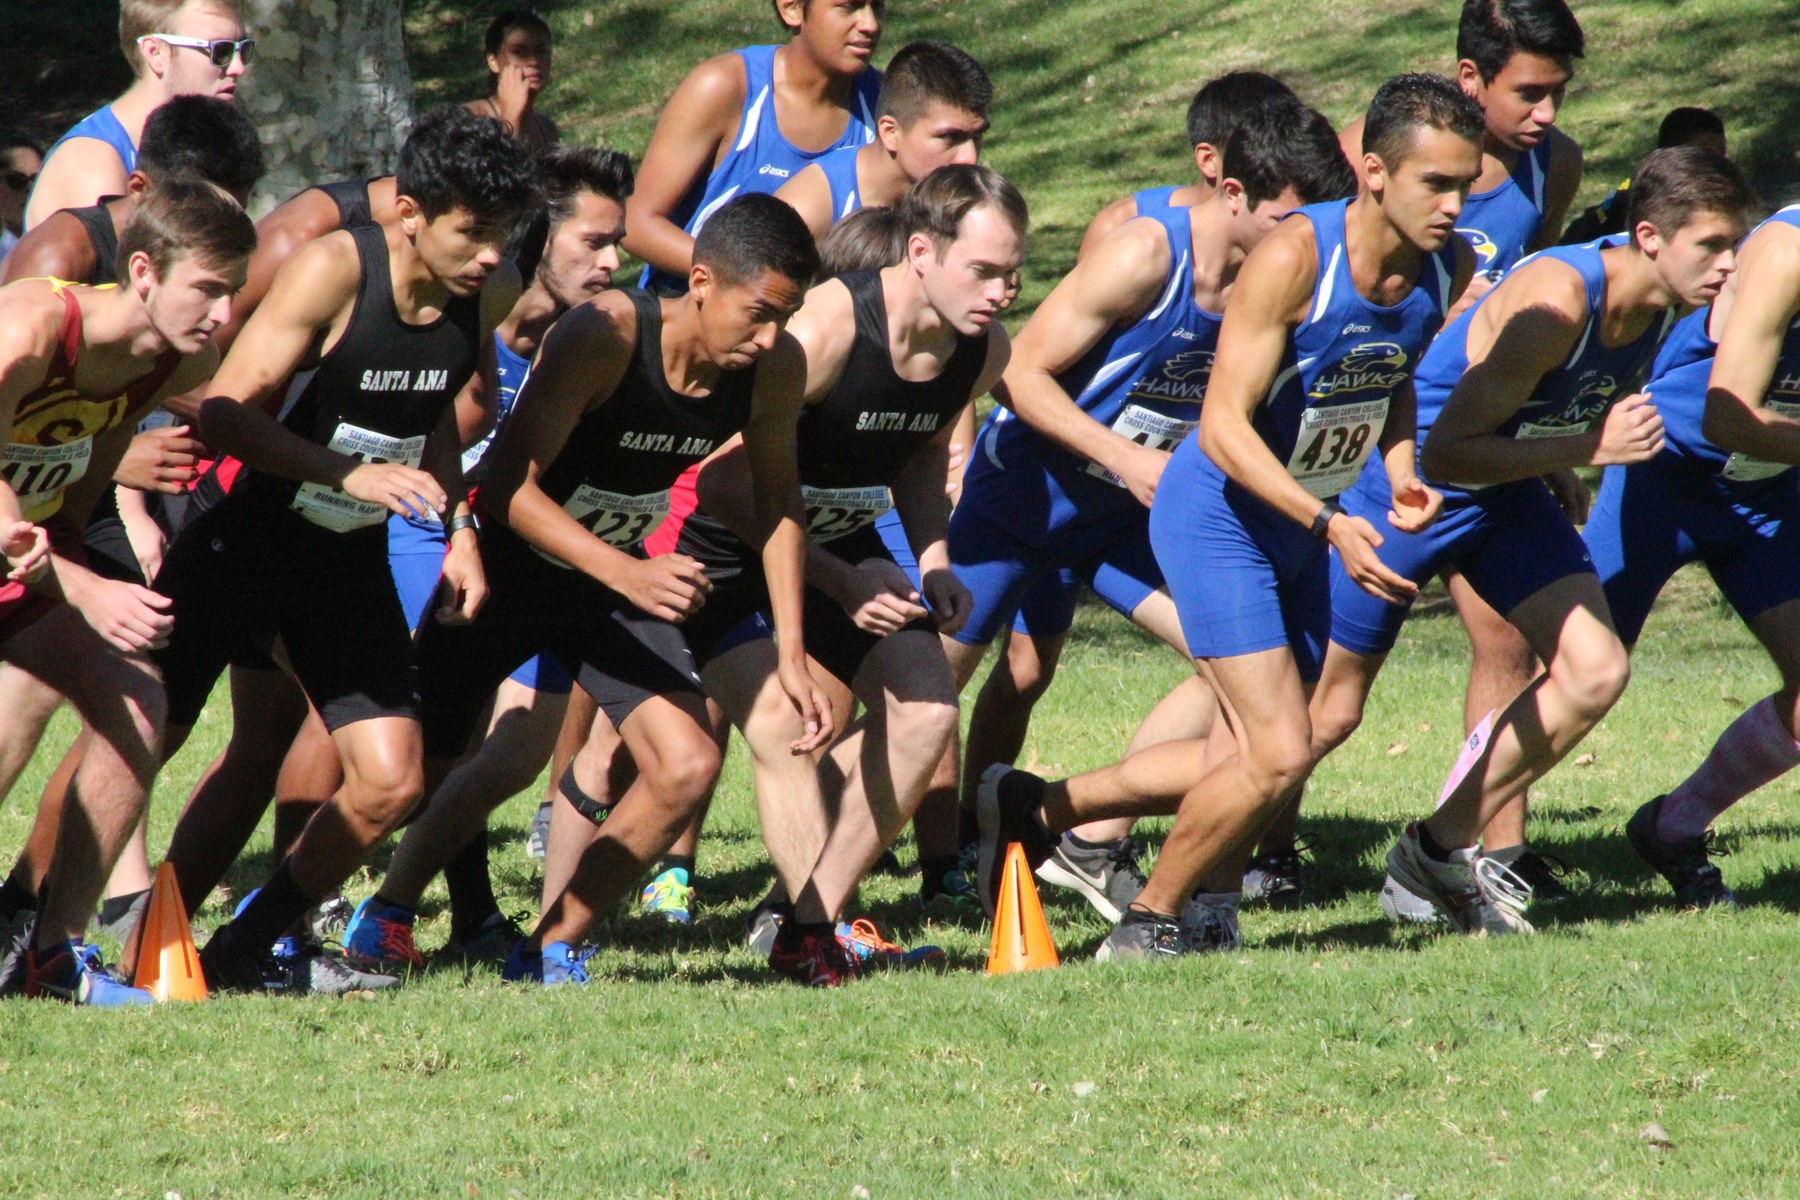 Santa Ana Cross Country Showcases New Group in Mark Covert Classic